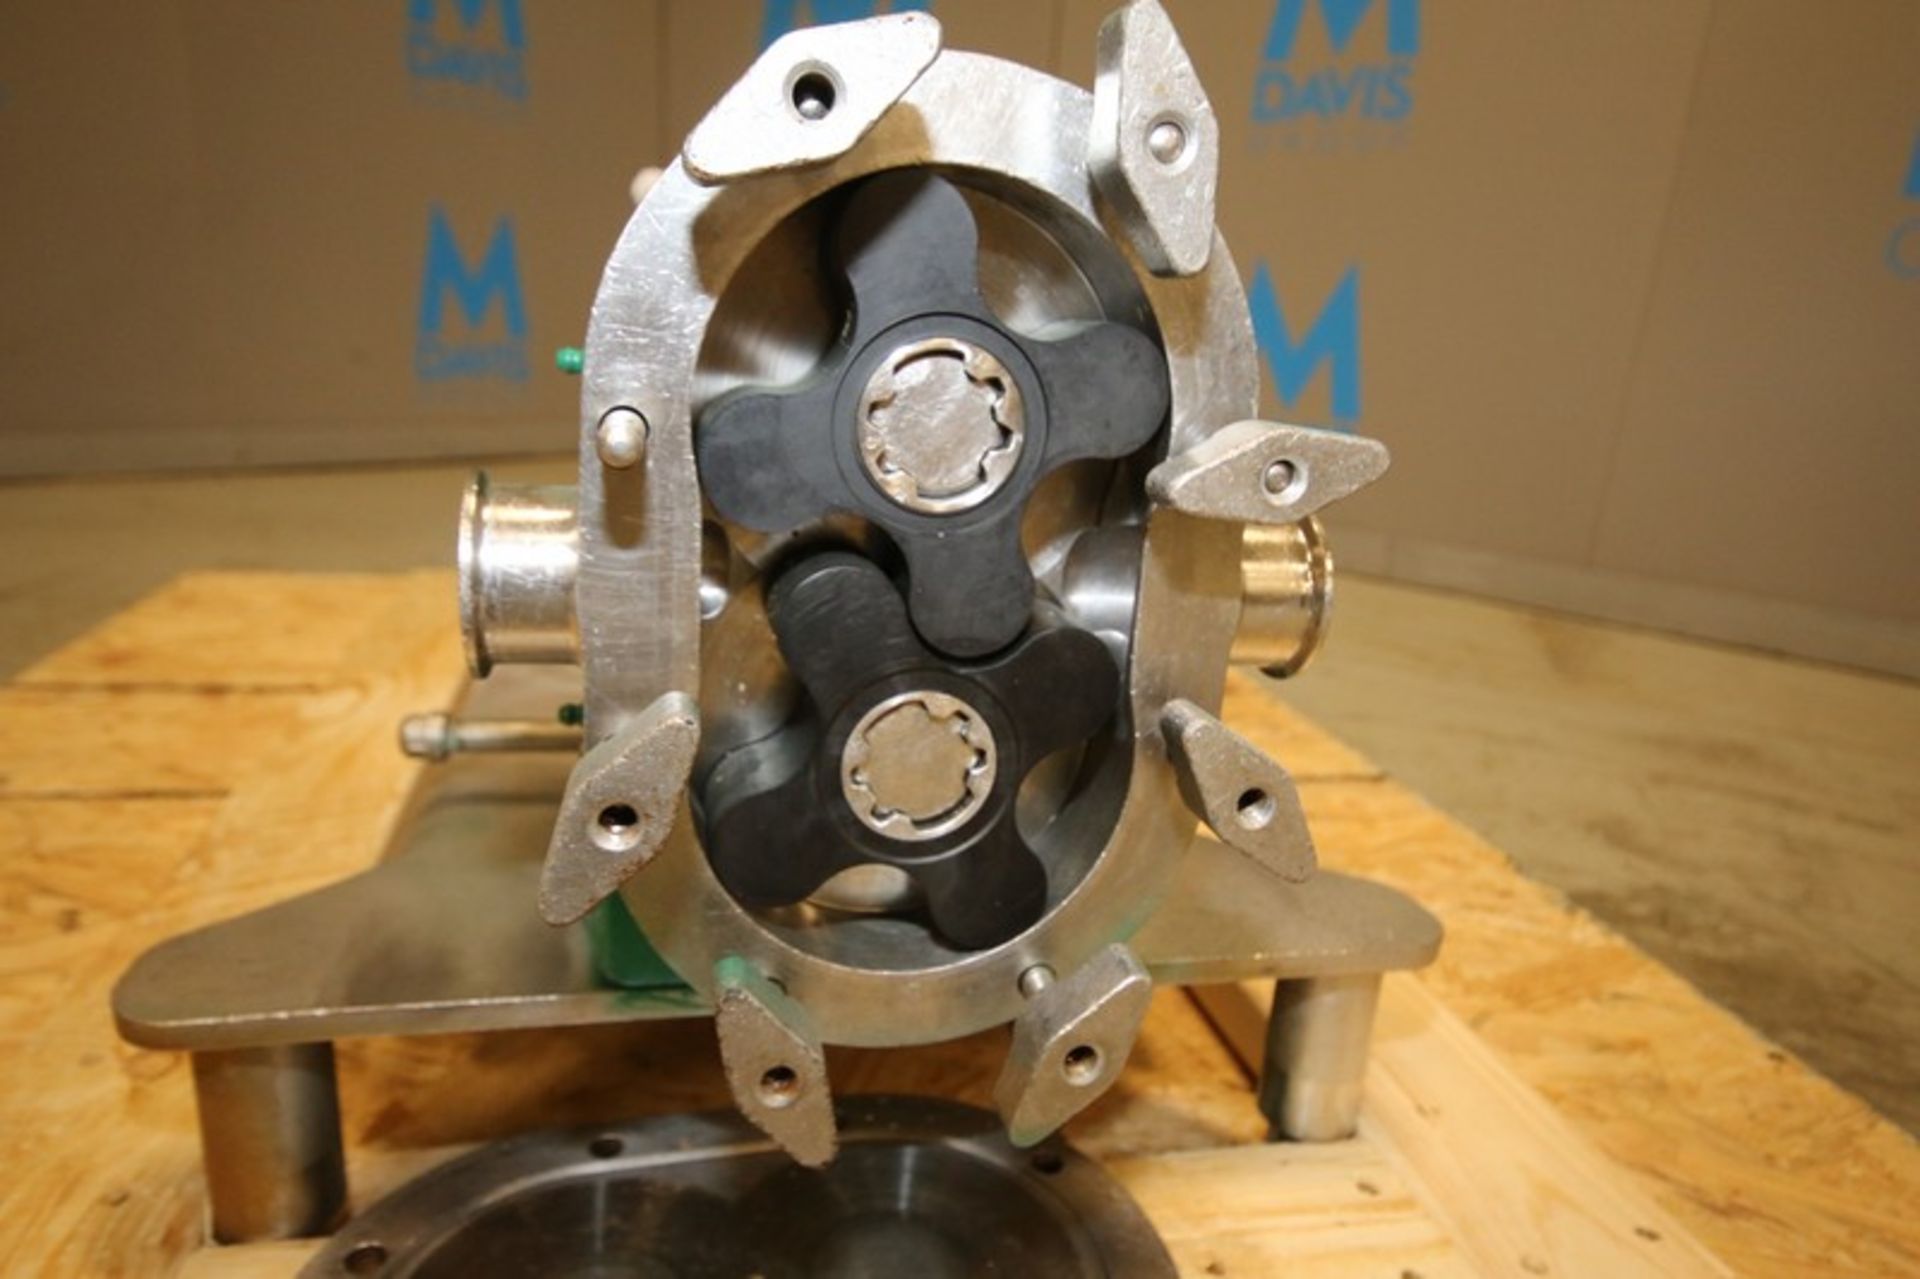 Tri Clover Positive Displacement Pump, Model PR25-1 1/2M-UC4-ST-S, S/N X3883, with 1 1/2" CT Head - Image 3 of 10